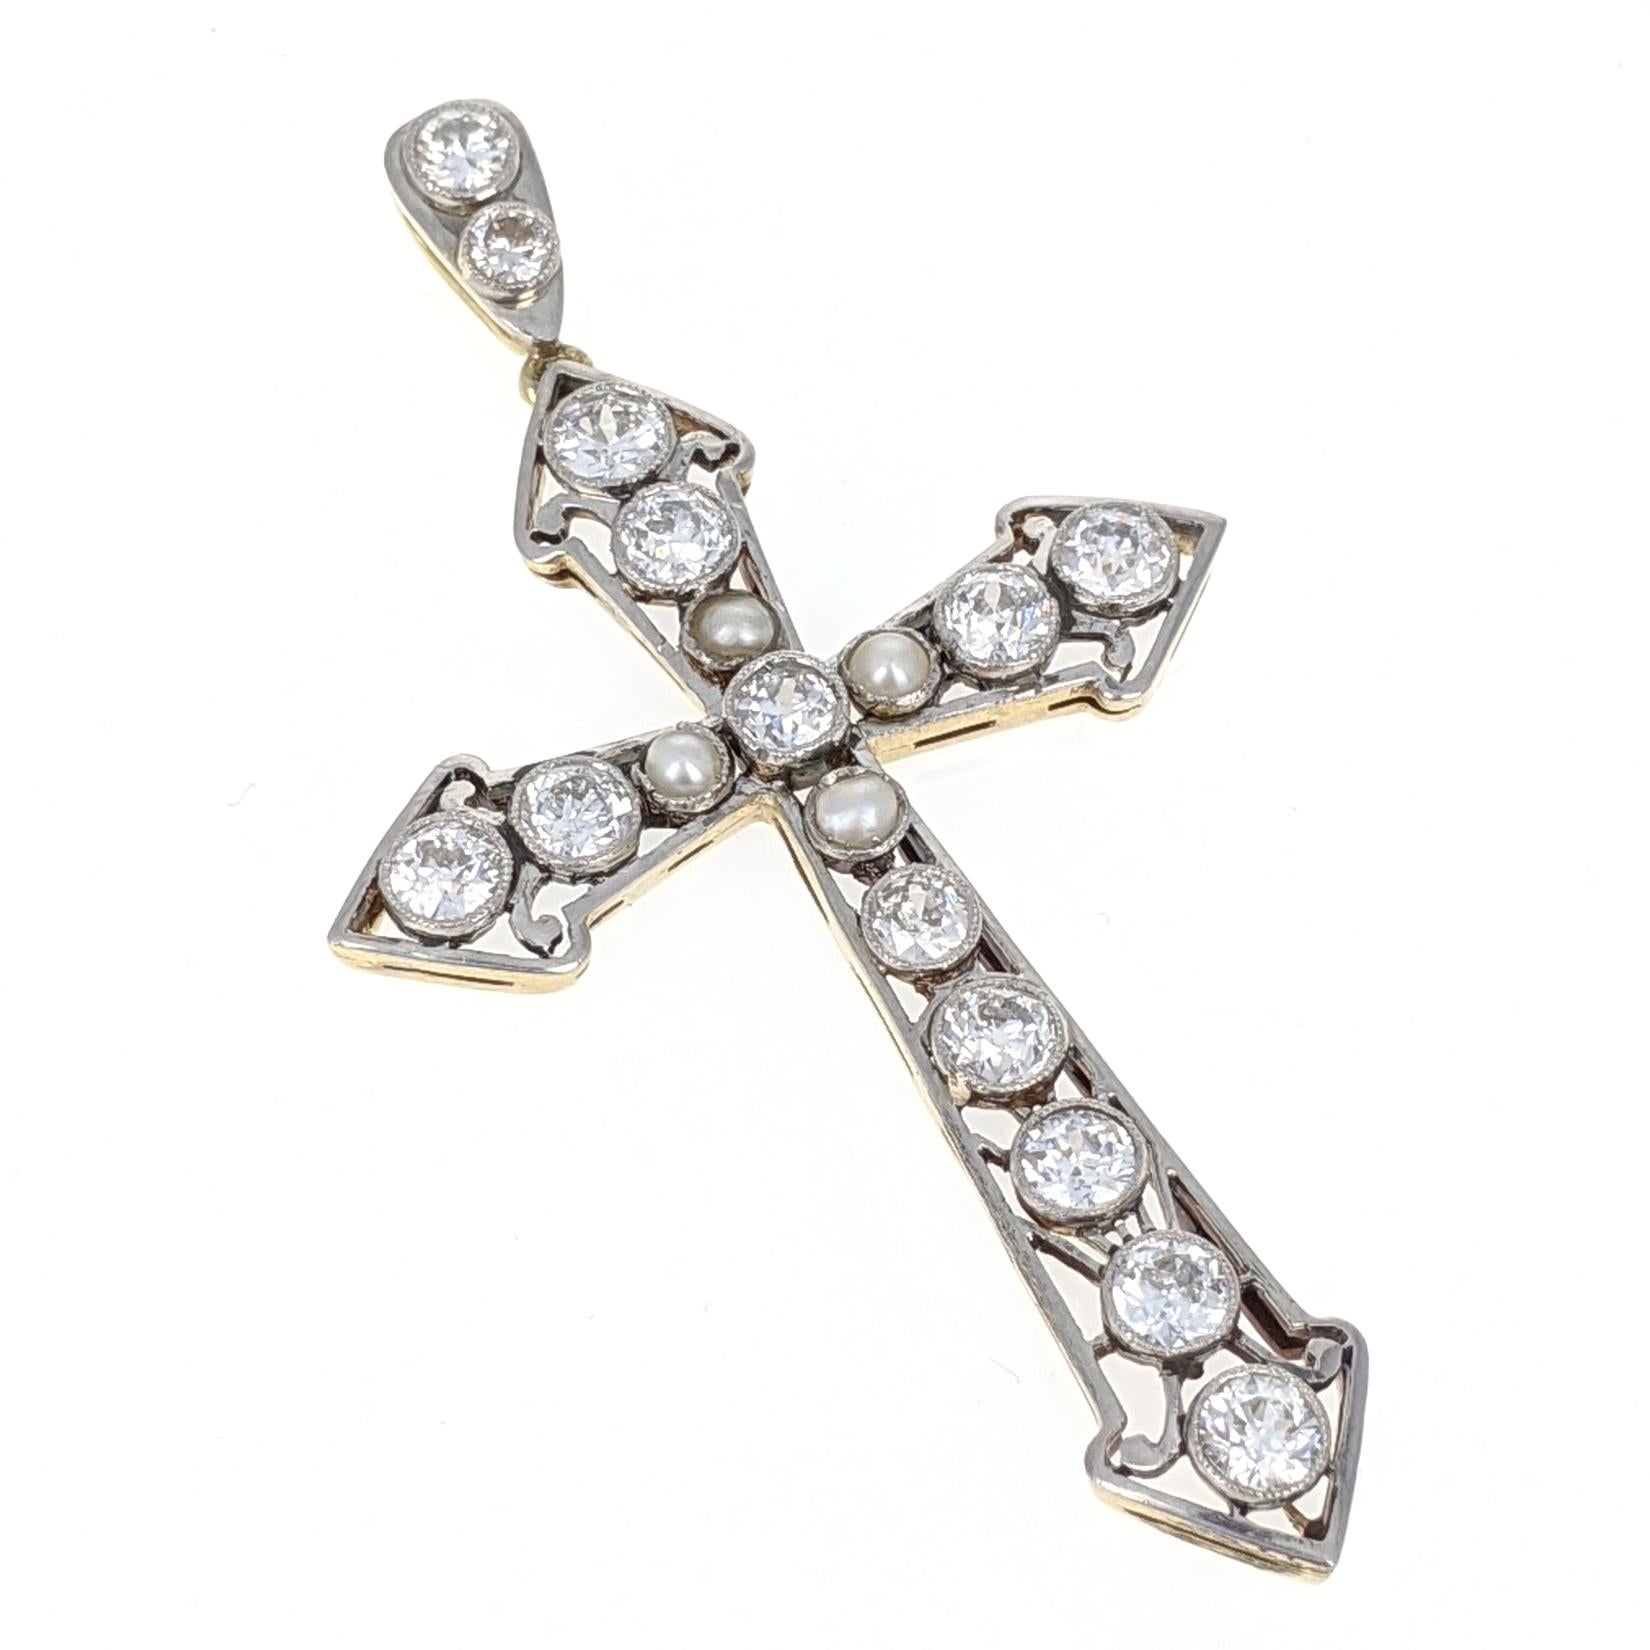 This cross pendant features four pearls and 14 Old-European cut diamonds weighing approximately 2 carats total. Mounted in platinum and yellow gold. Measures 2.25